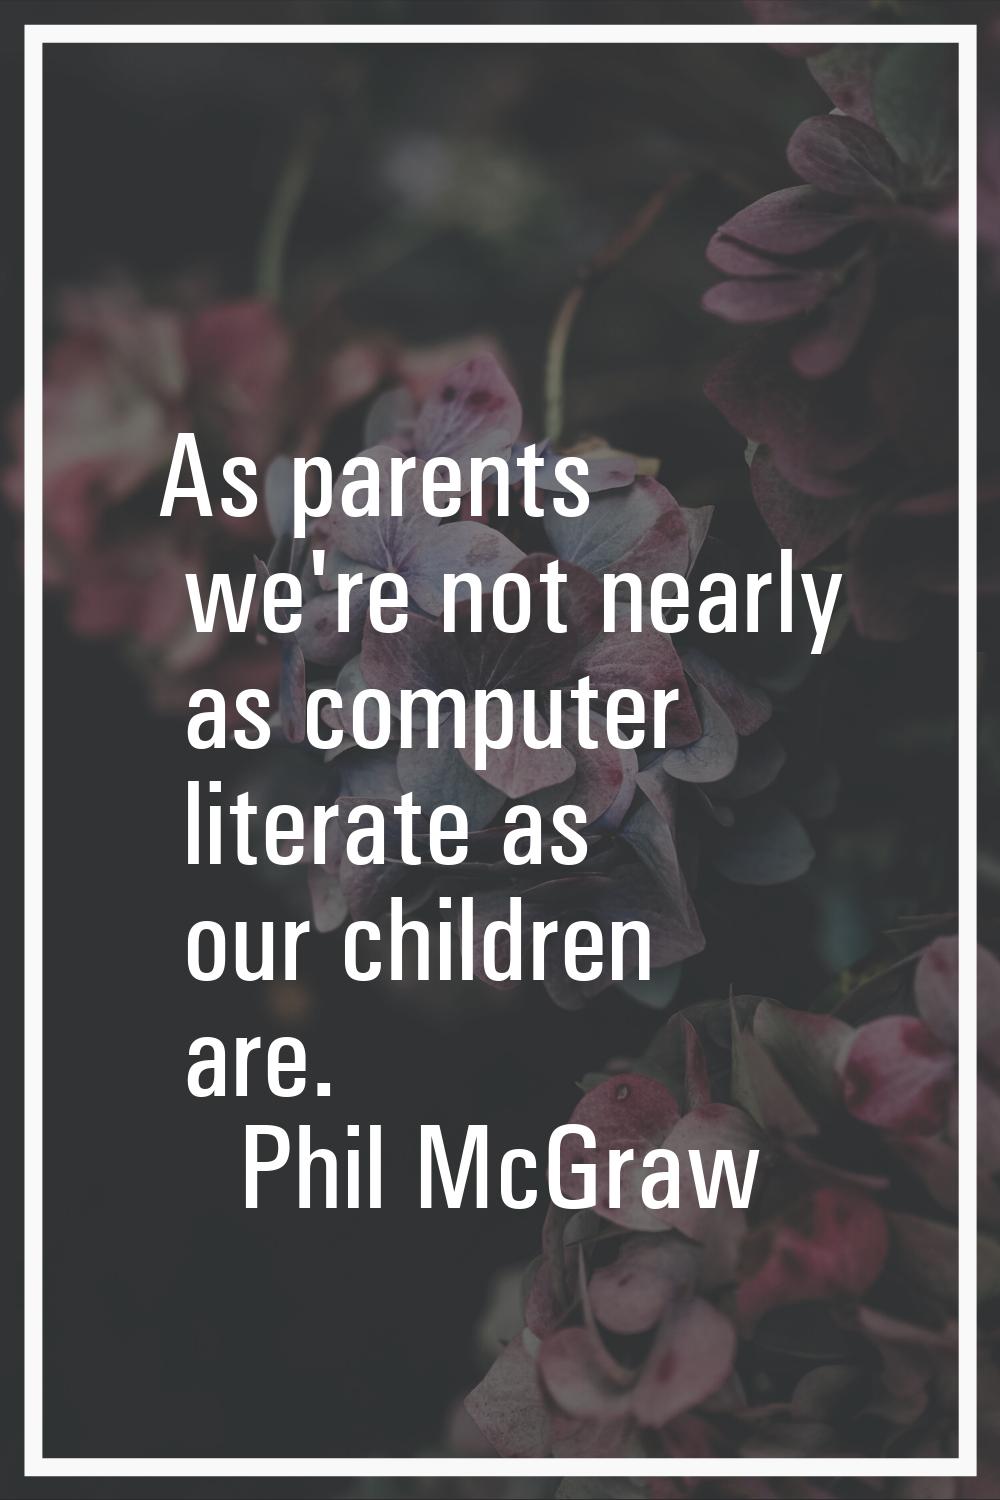 As parents we're not nearly as computer literate as our children are.